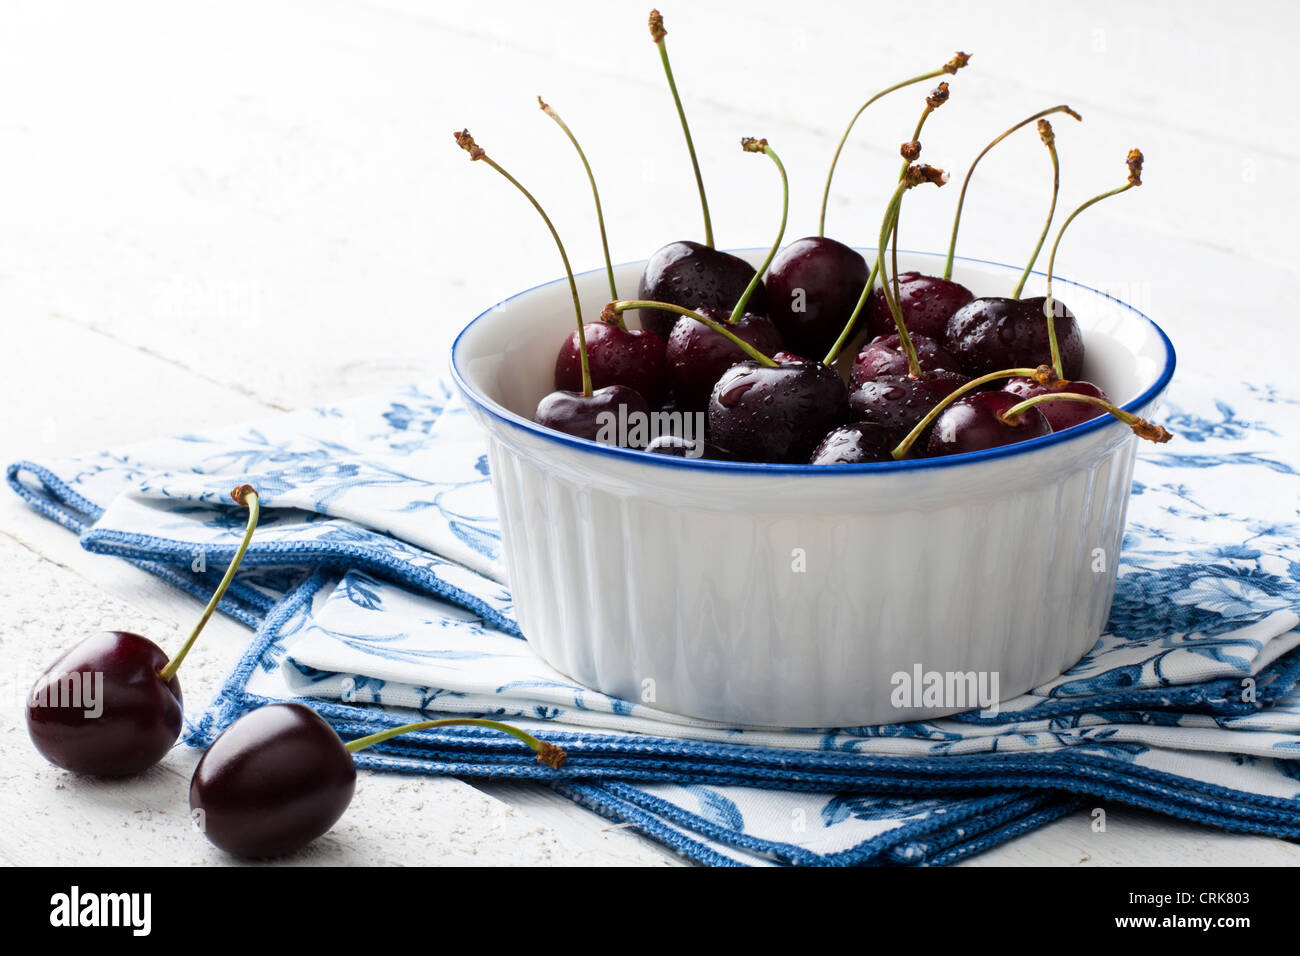 Cherries in a Bowl on Napkin and White Wood Stock Photo